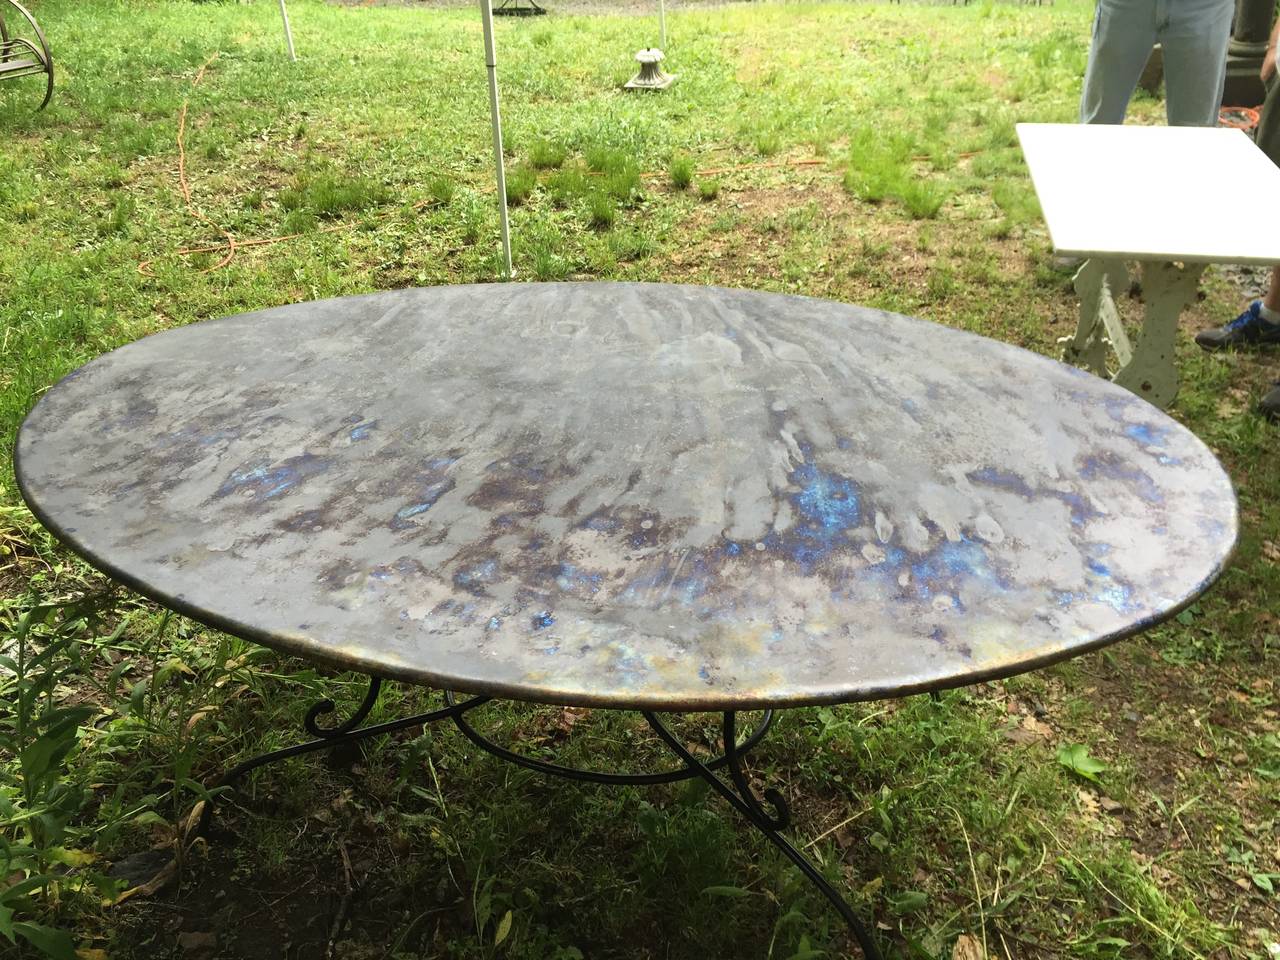 We love this fabulous table, not only for its commodious size (will seat eight-ten, depending on chair size), but for its amazing mottled surface. When we bought it, it really needed a facelift, so we went to work, intending only to redo it in